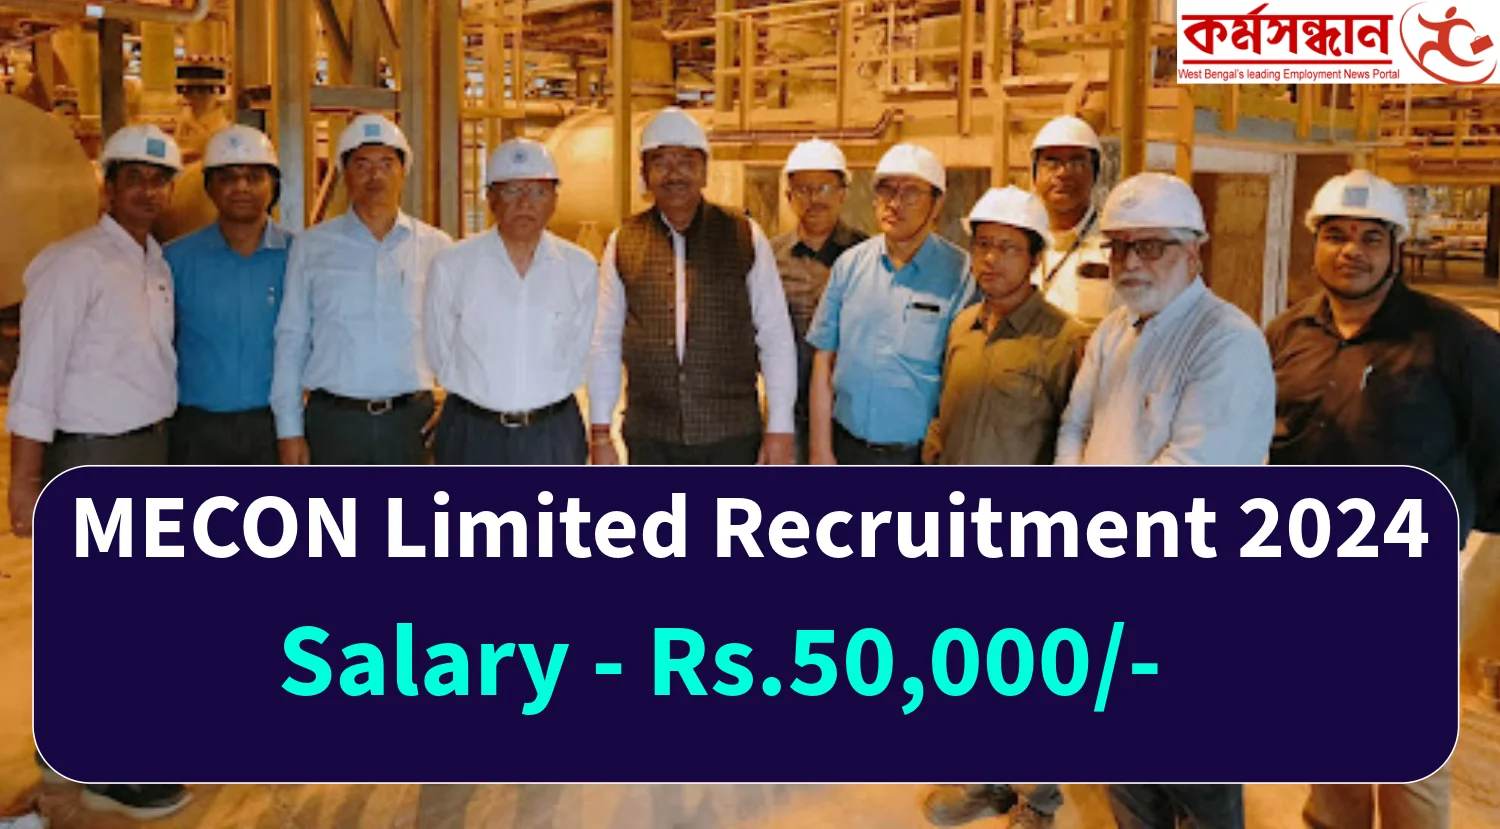 MECON Limited Recruitment 2024